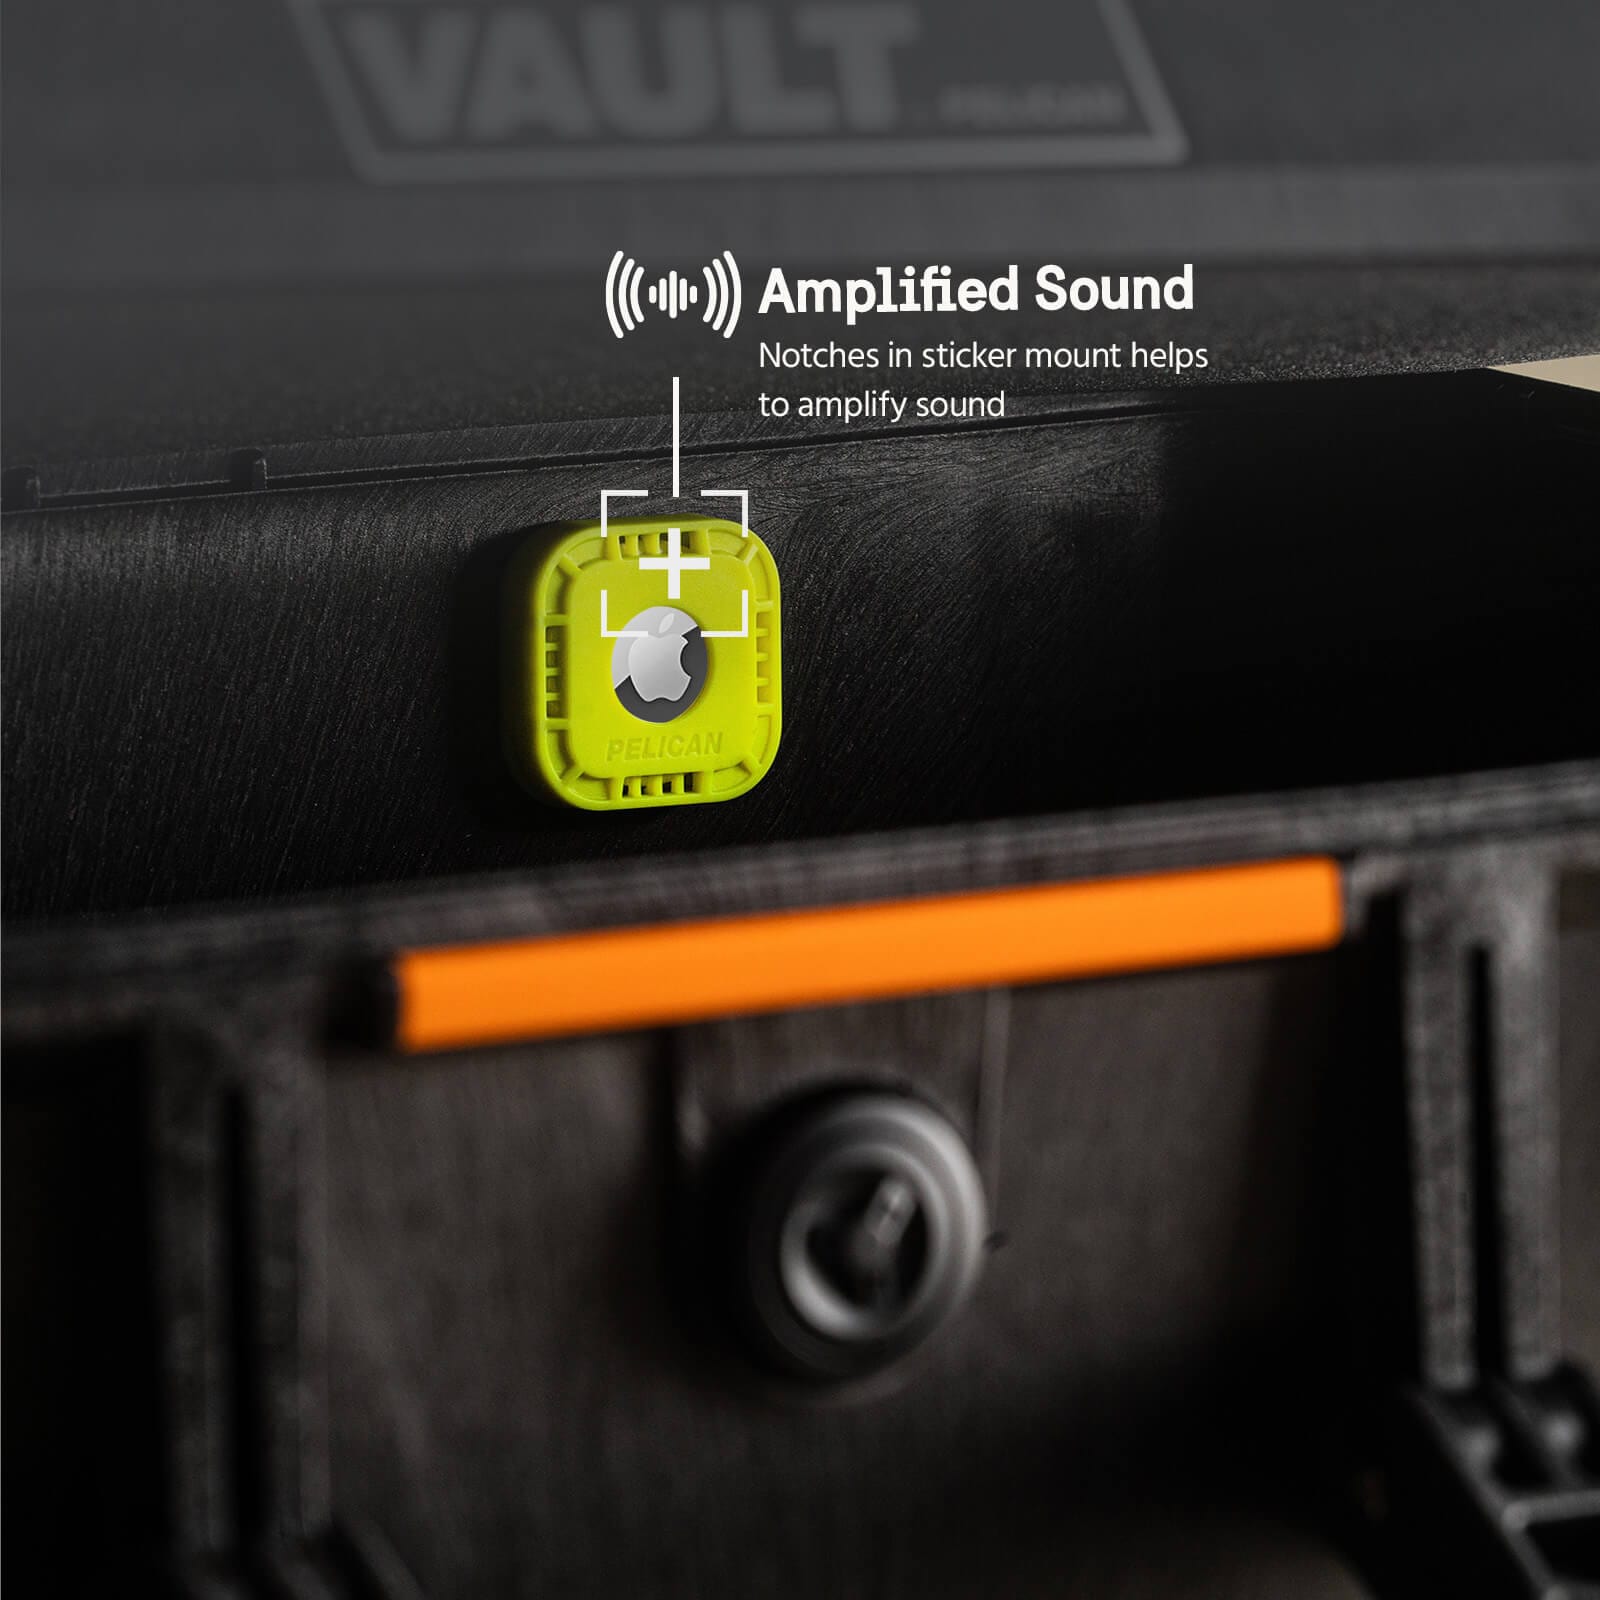 Amplified sound. notches in sticker mount helps to amplify sound. color::Hi-Vis Yellow